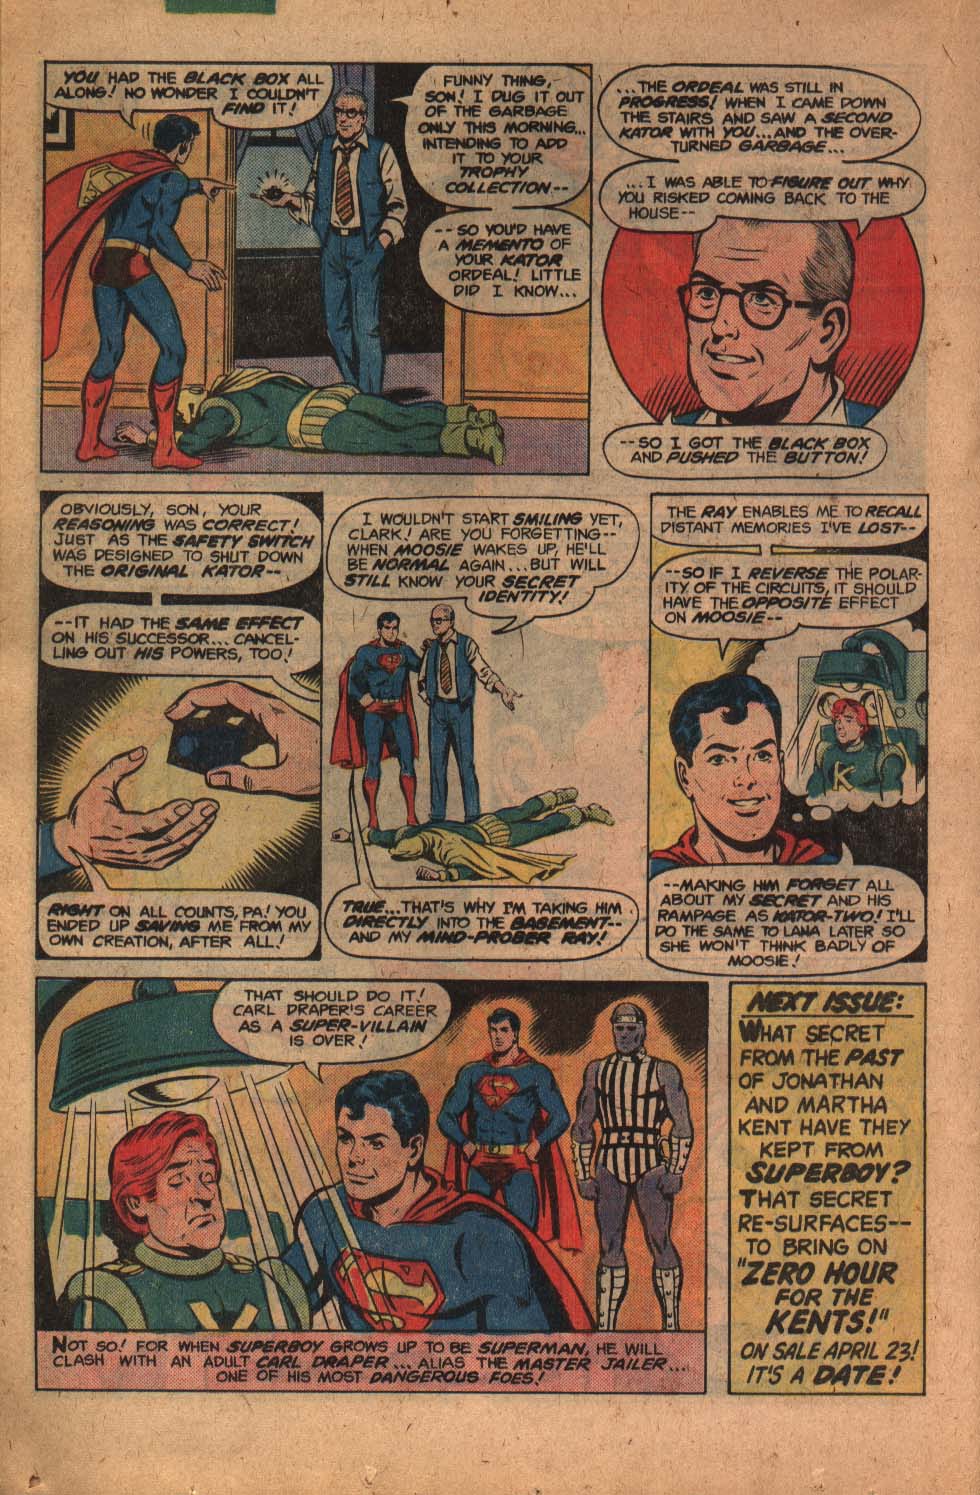 The New Adventures of Superboy 18 Page 21